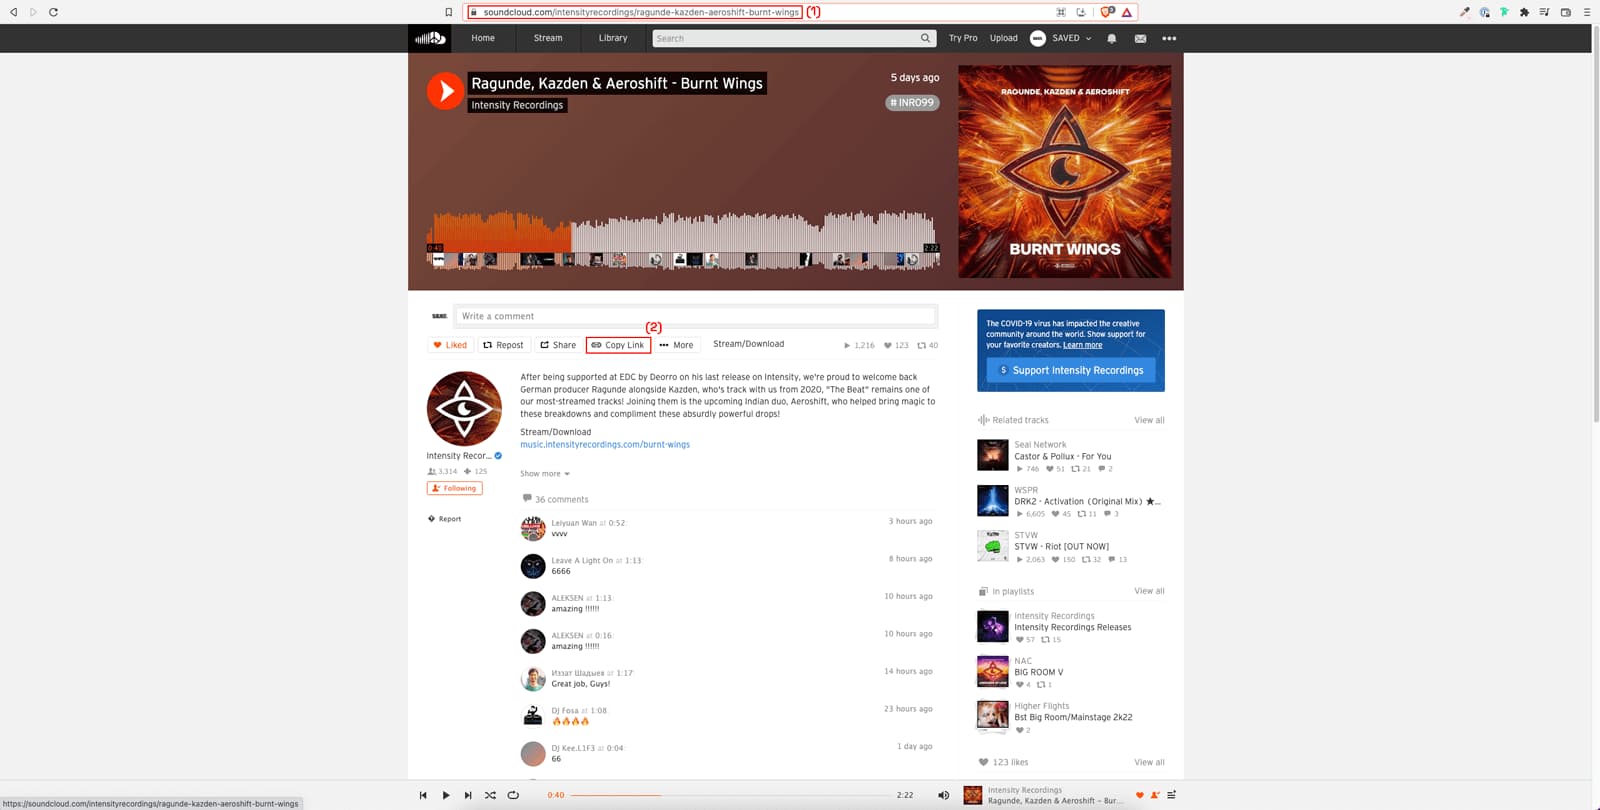 How to download songs from SoundCloud?